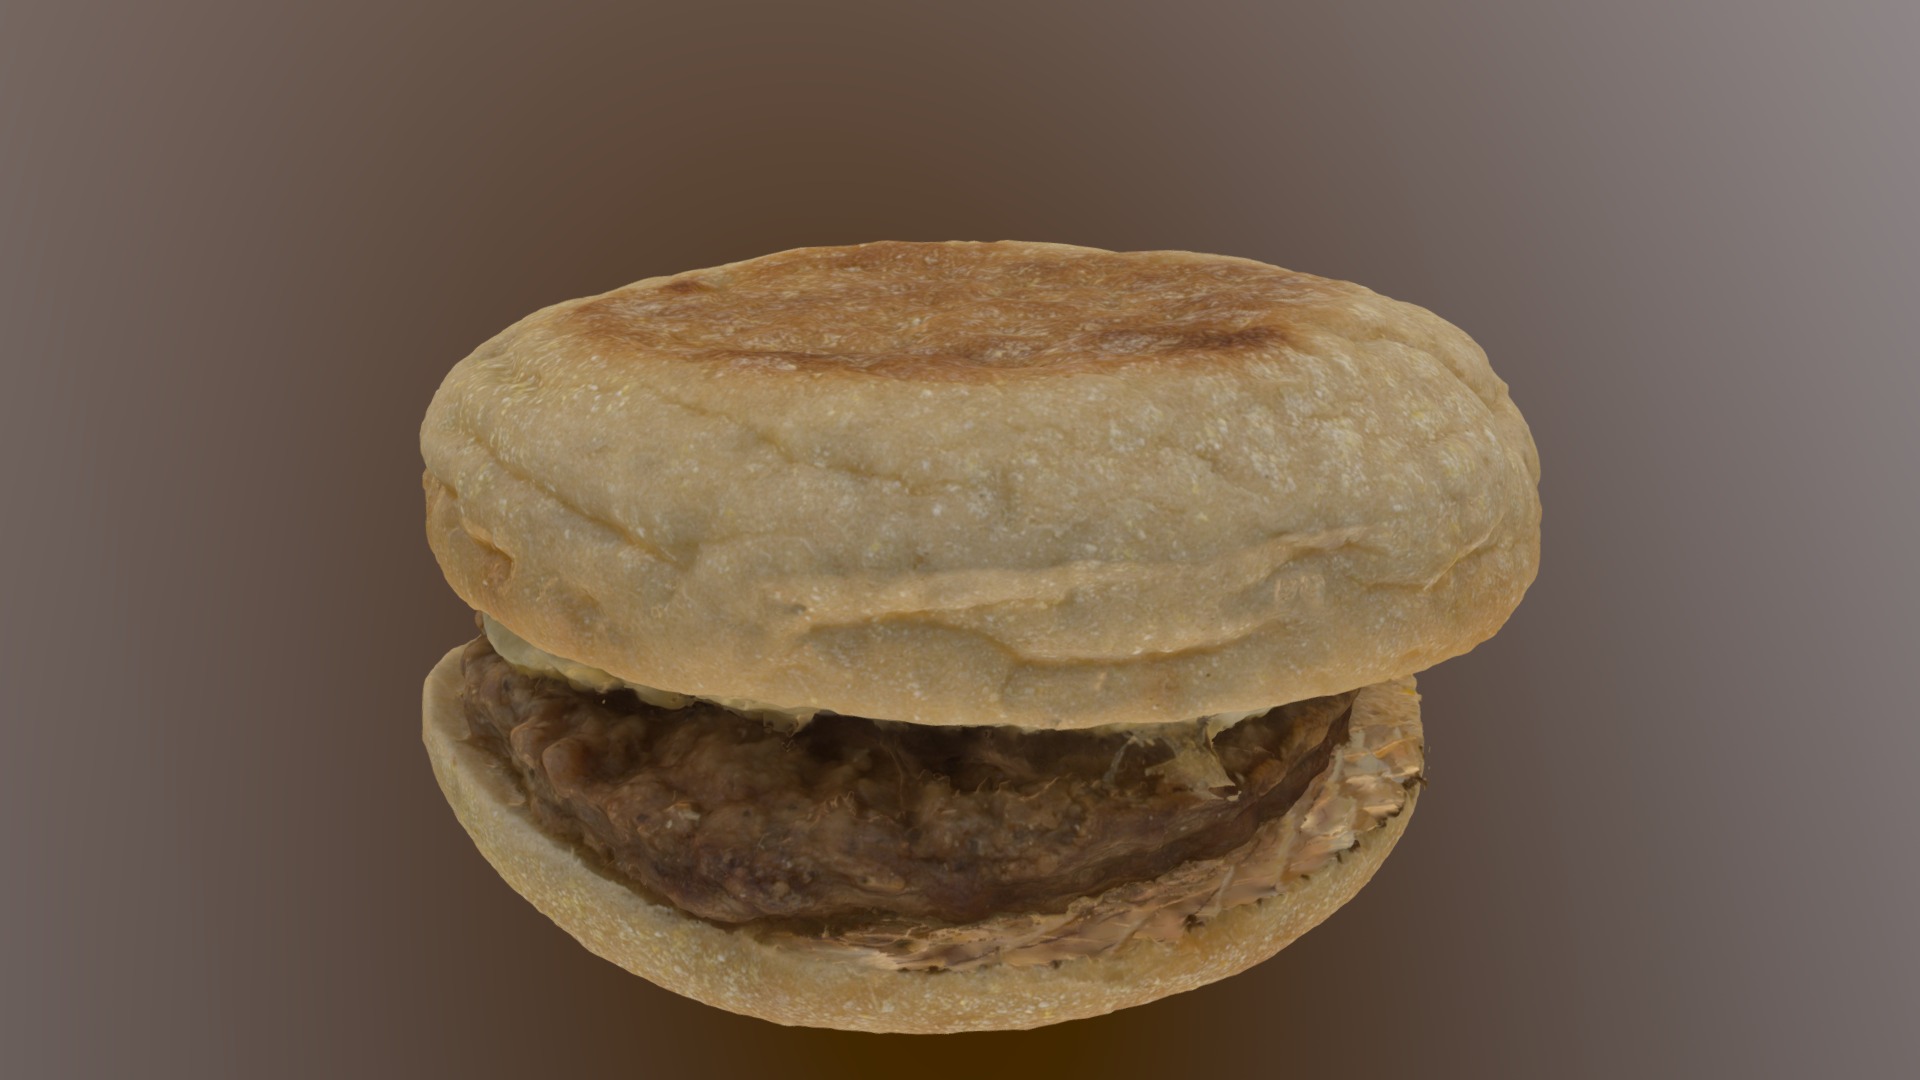 3D model Sausage Egg Cheese English Muffin - This is a 3D model of the Sausage Egg Cheese English Muffin. The 3D model is about a hamburger with a bun.